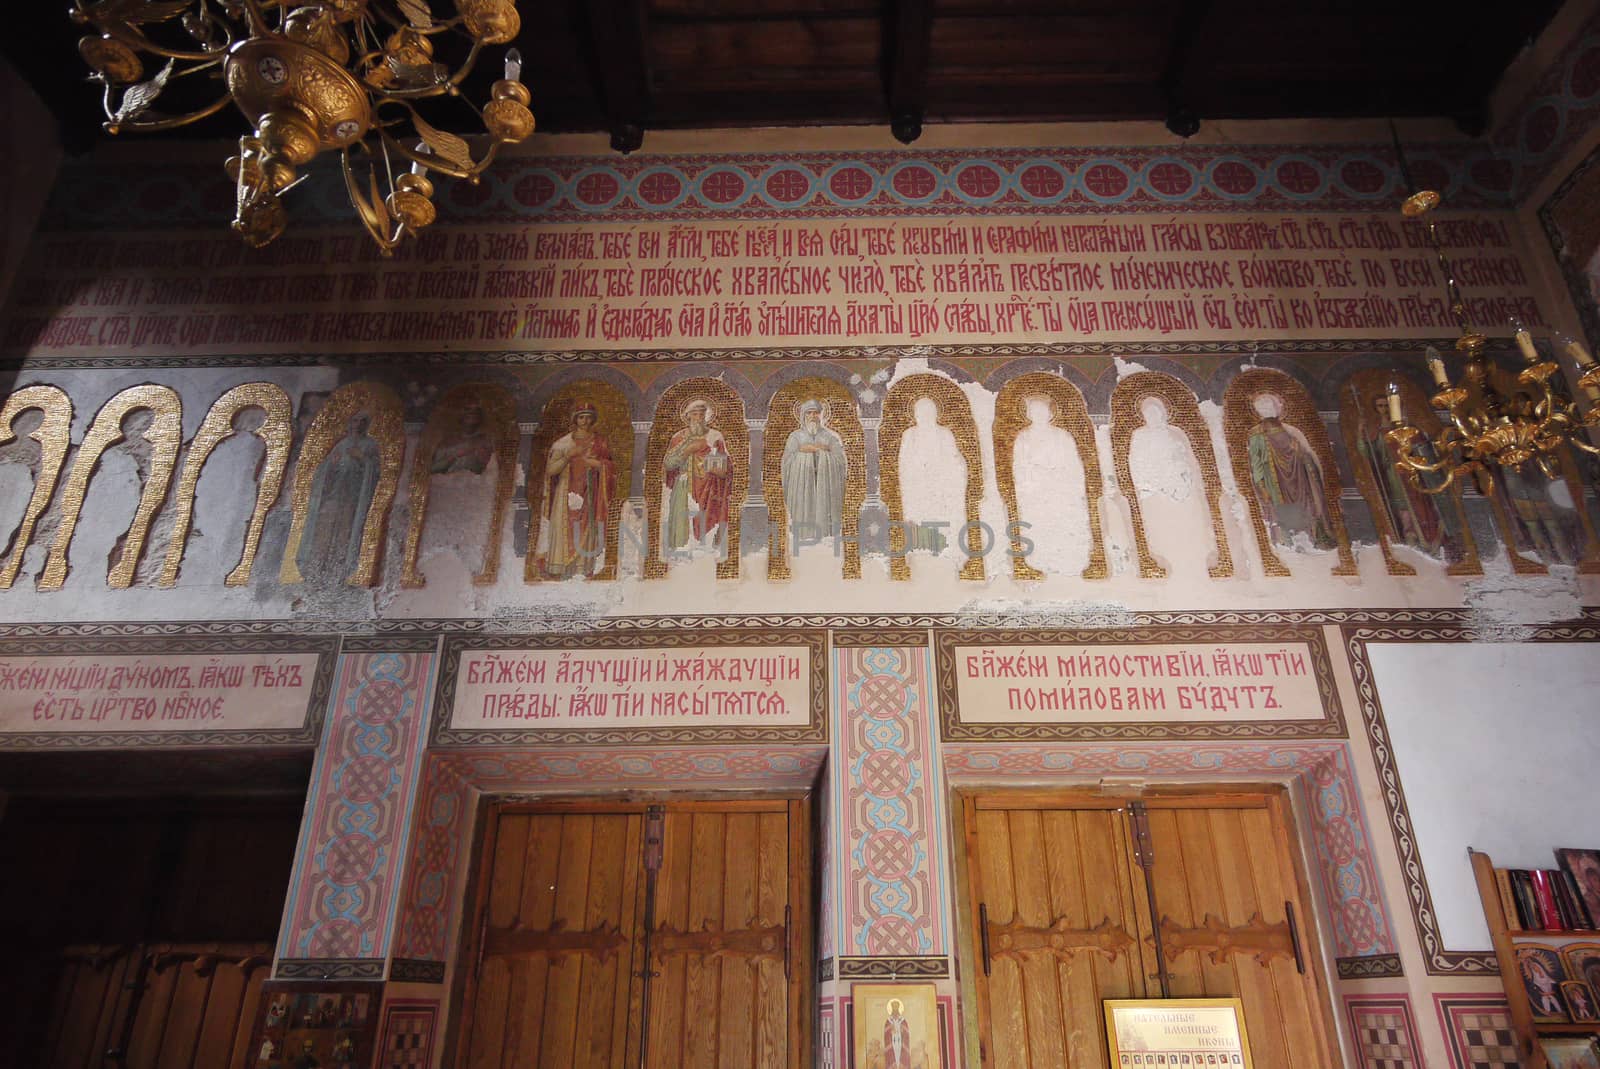 wall in the church with saints' faces and church texts